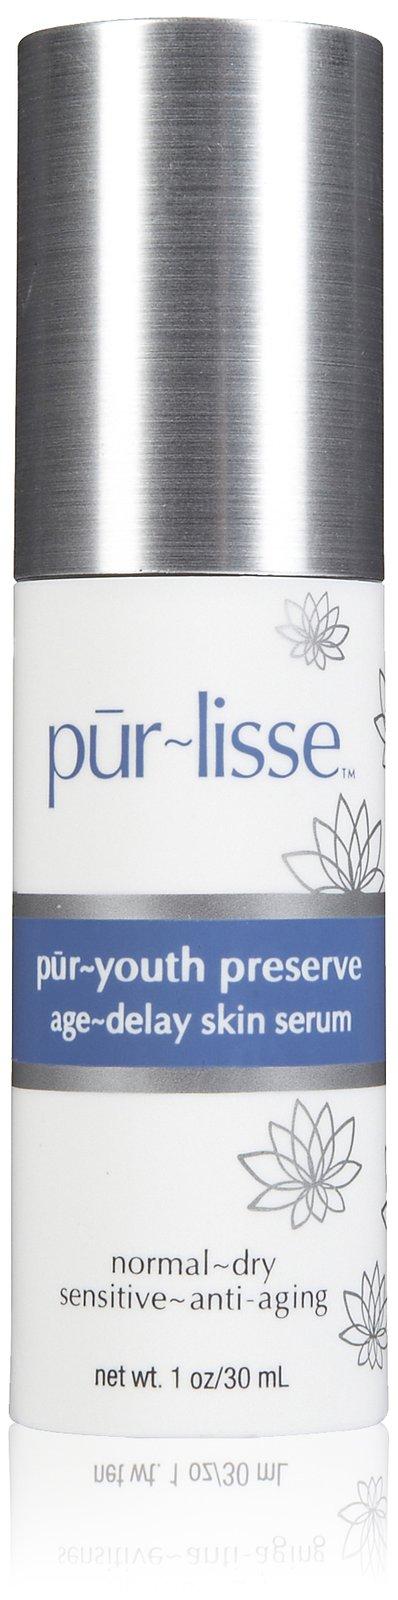 Pur~lisse Pur~youth Preserve Age Delay Serum